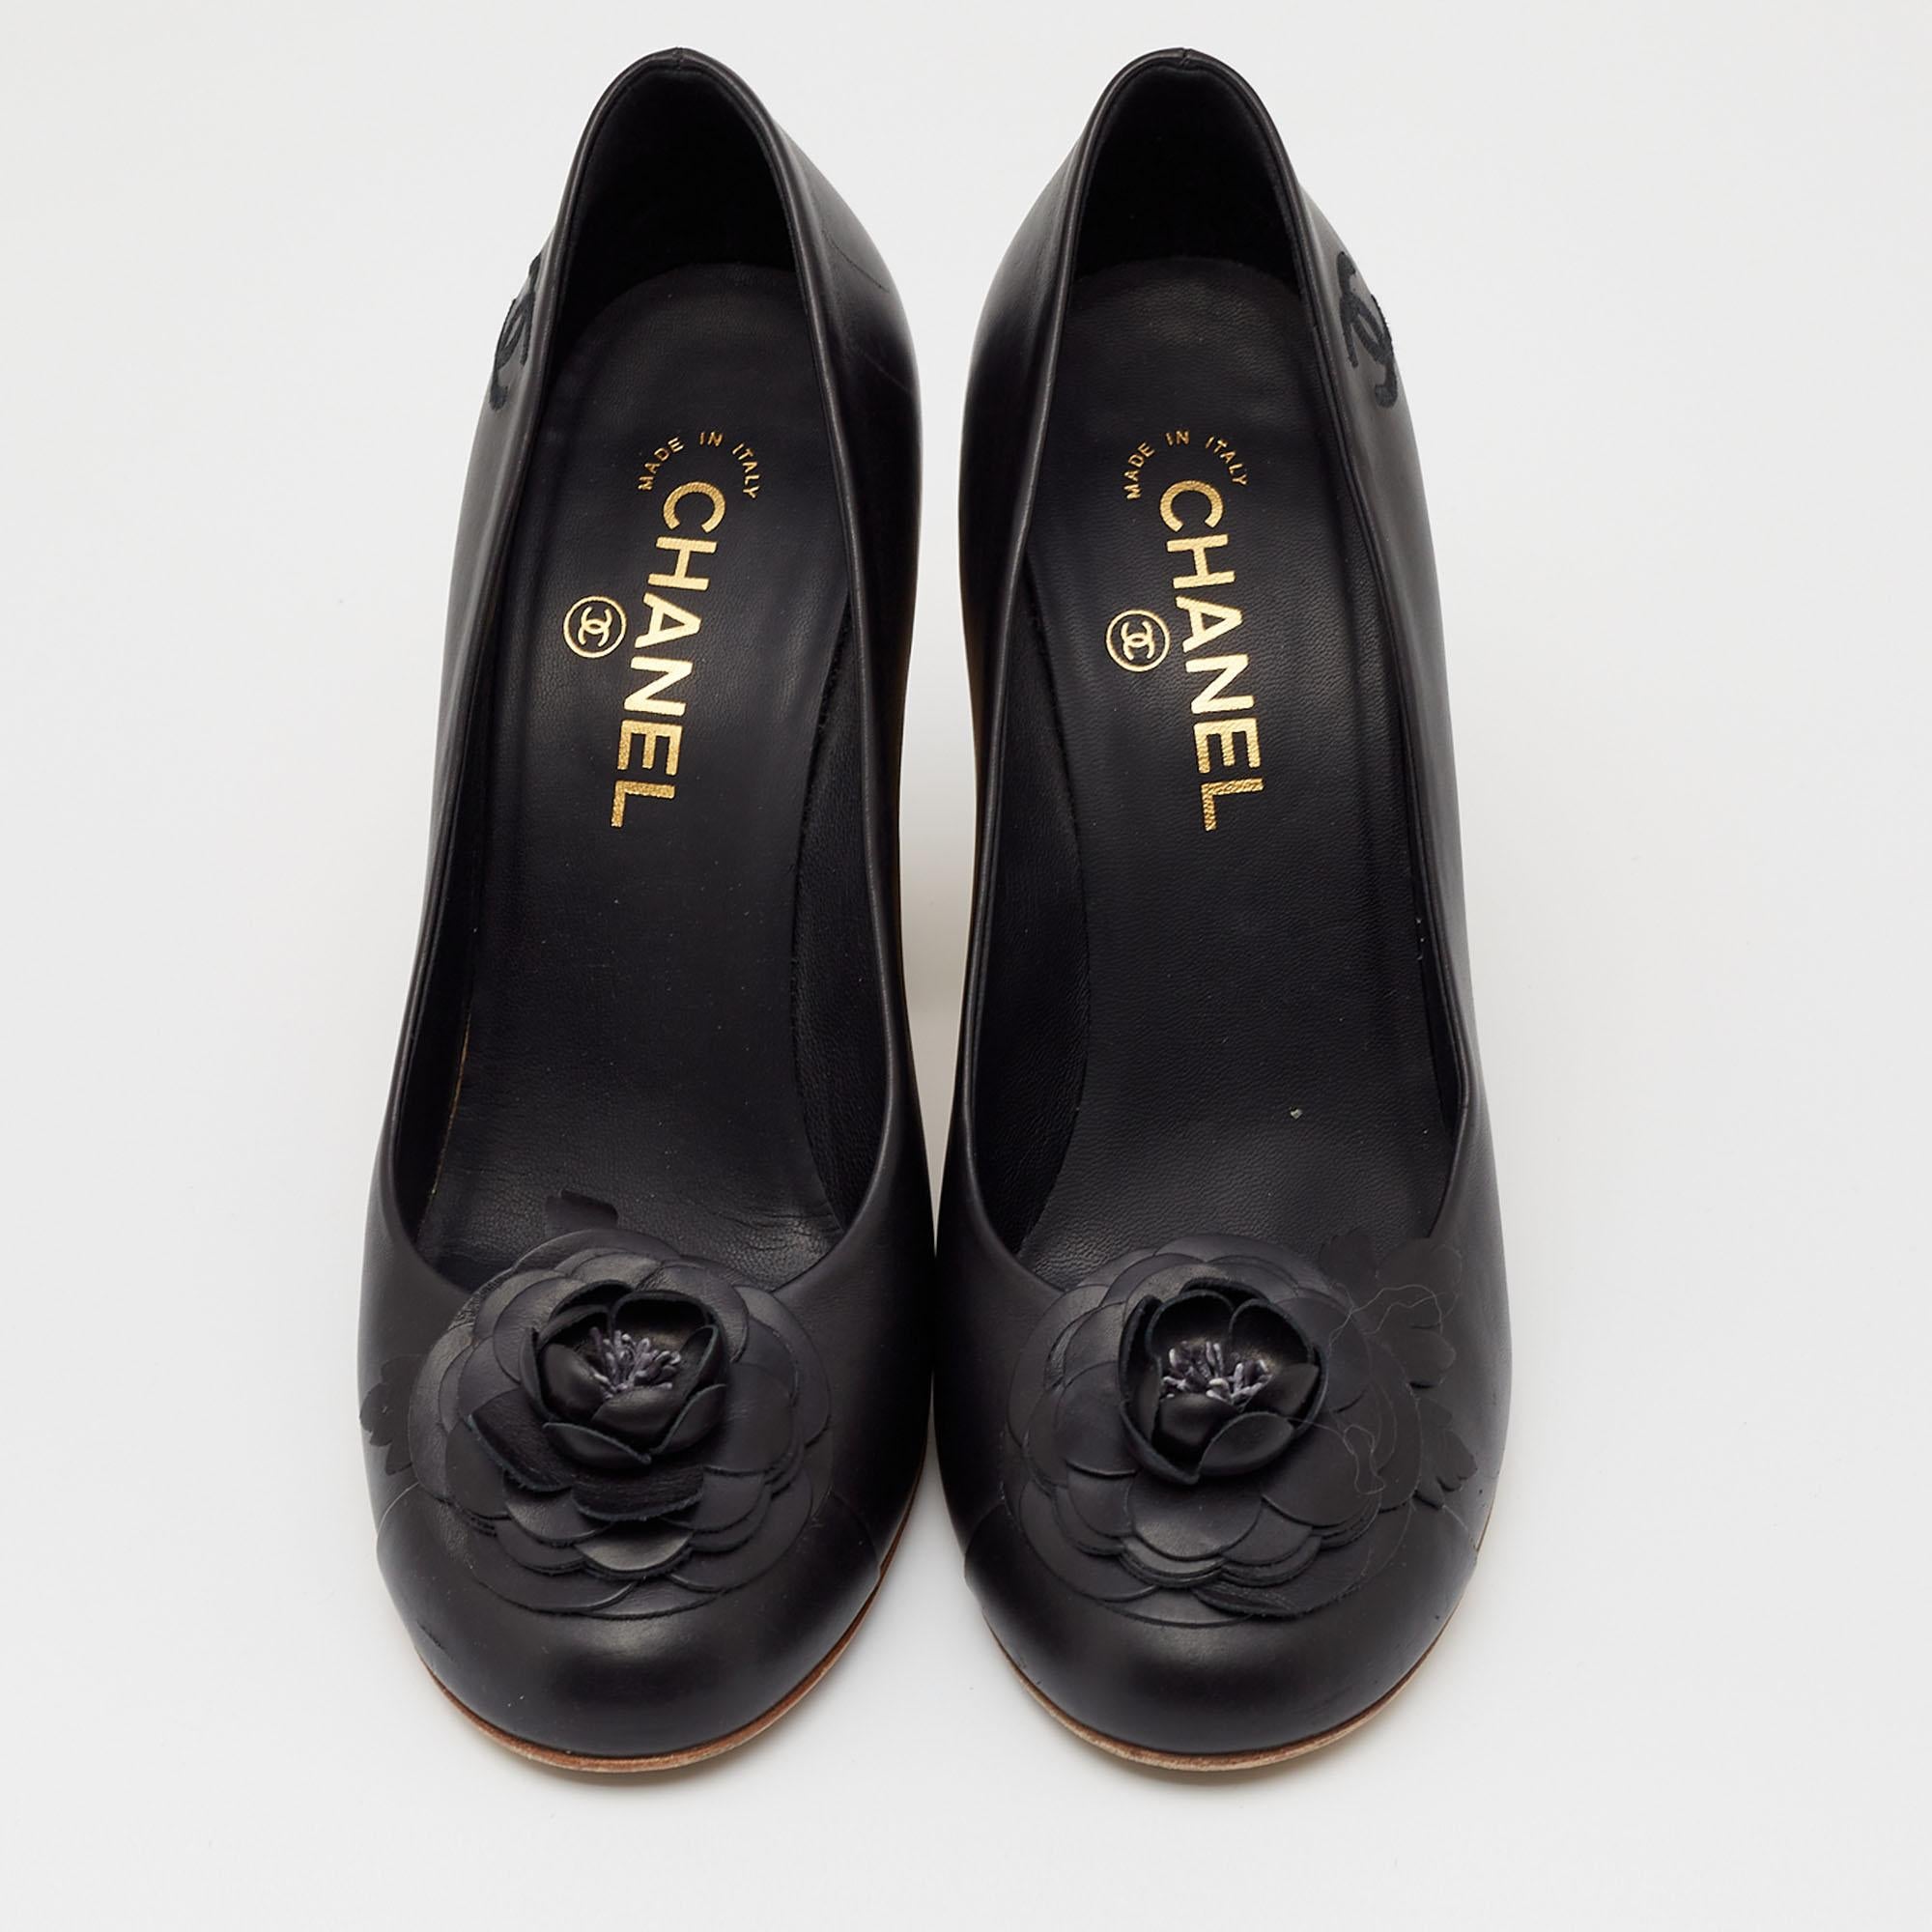 The quilted heels of this pair of Chanel pumps will fill your day with graceful and eye-catching steps. Created from leather, its cap toe is adorned with a Camellia motif, and it flaunts branded insoles.

Includes: Original Dustbag